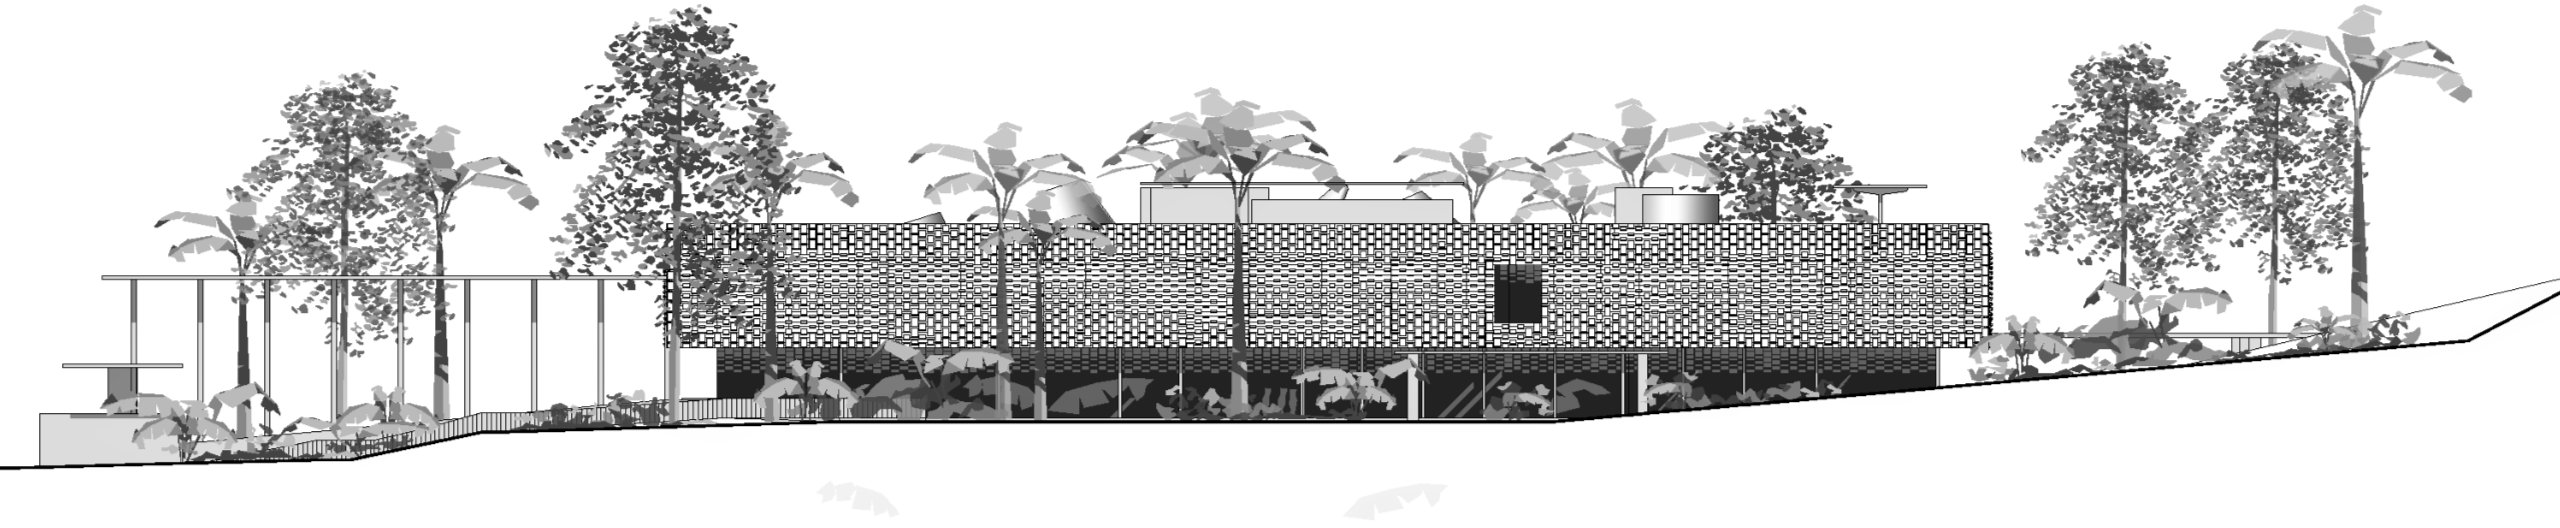 Franco-German_Embassy_Maputo_Competition_Section